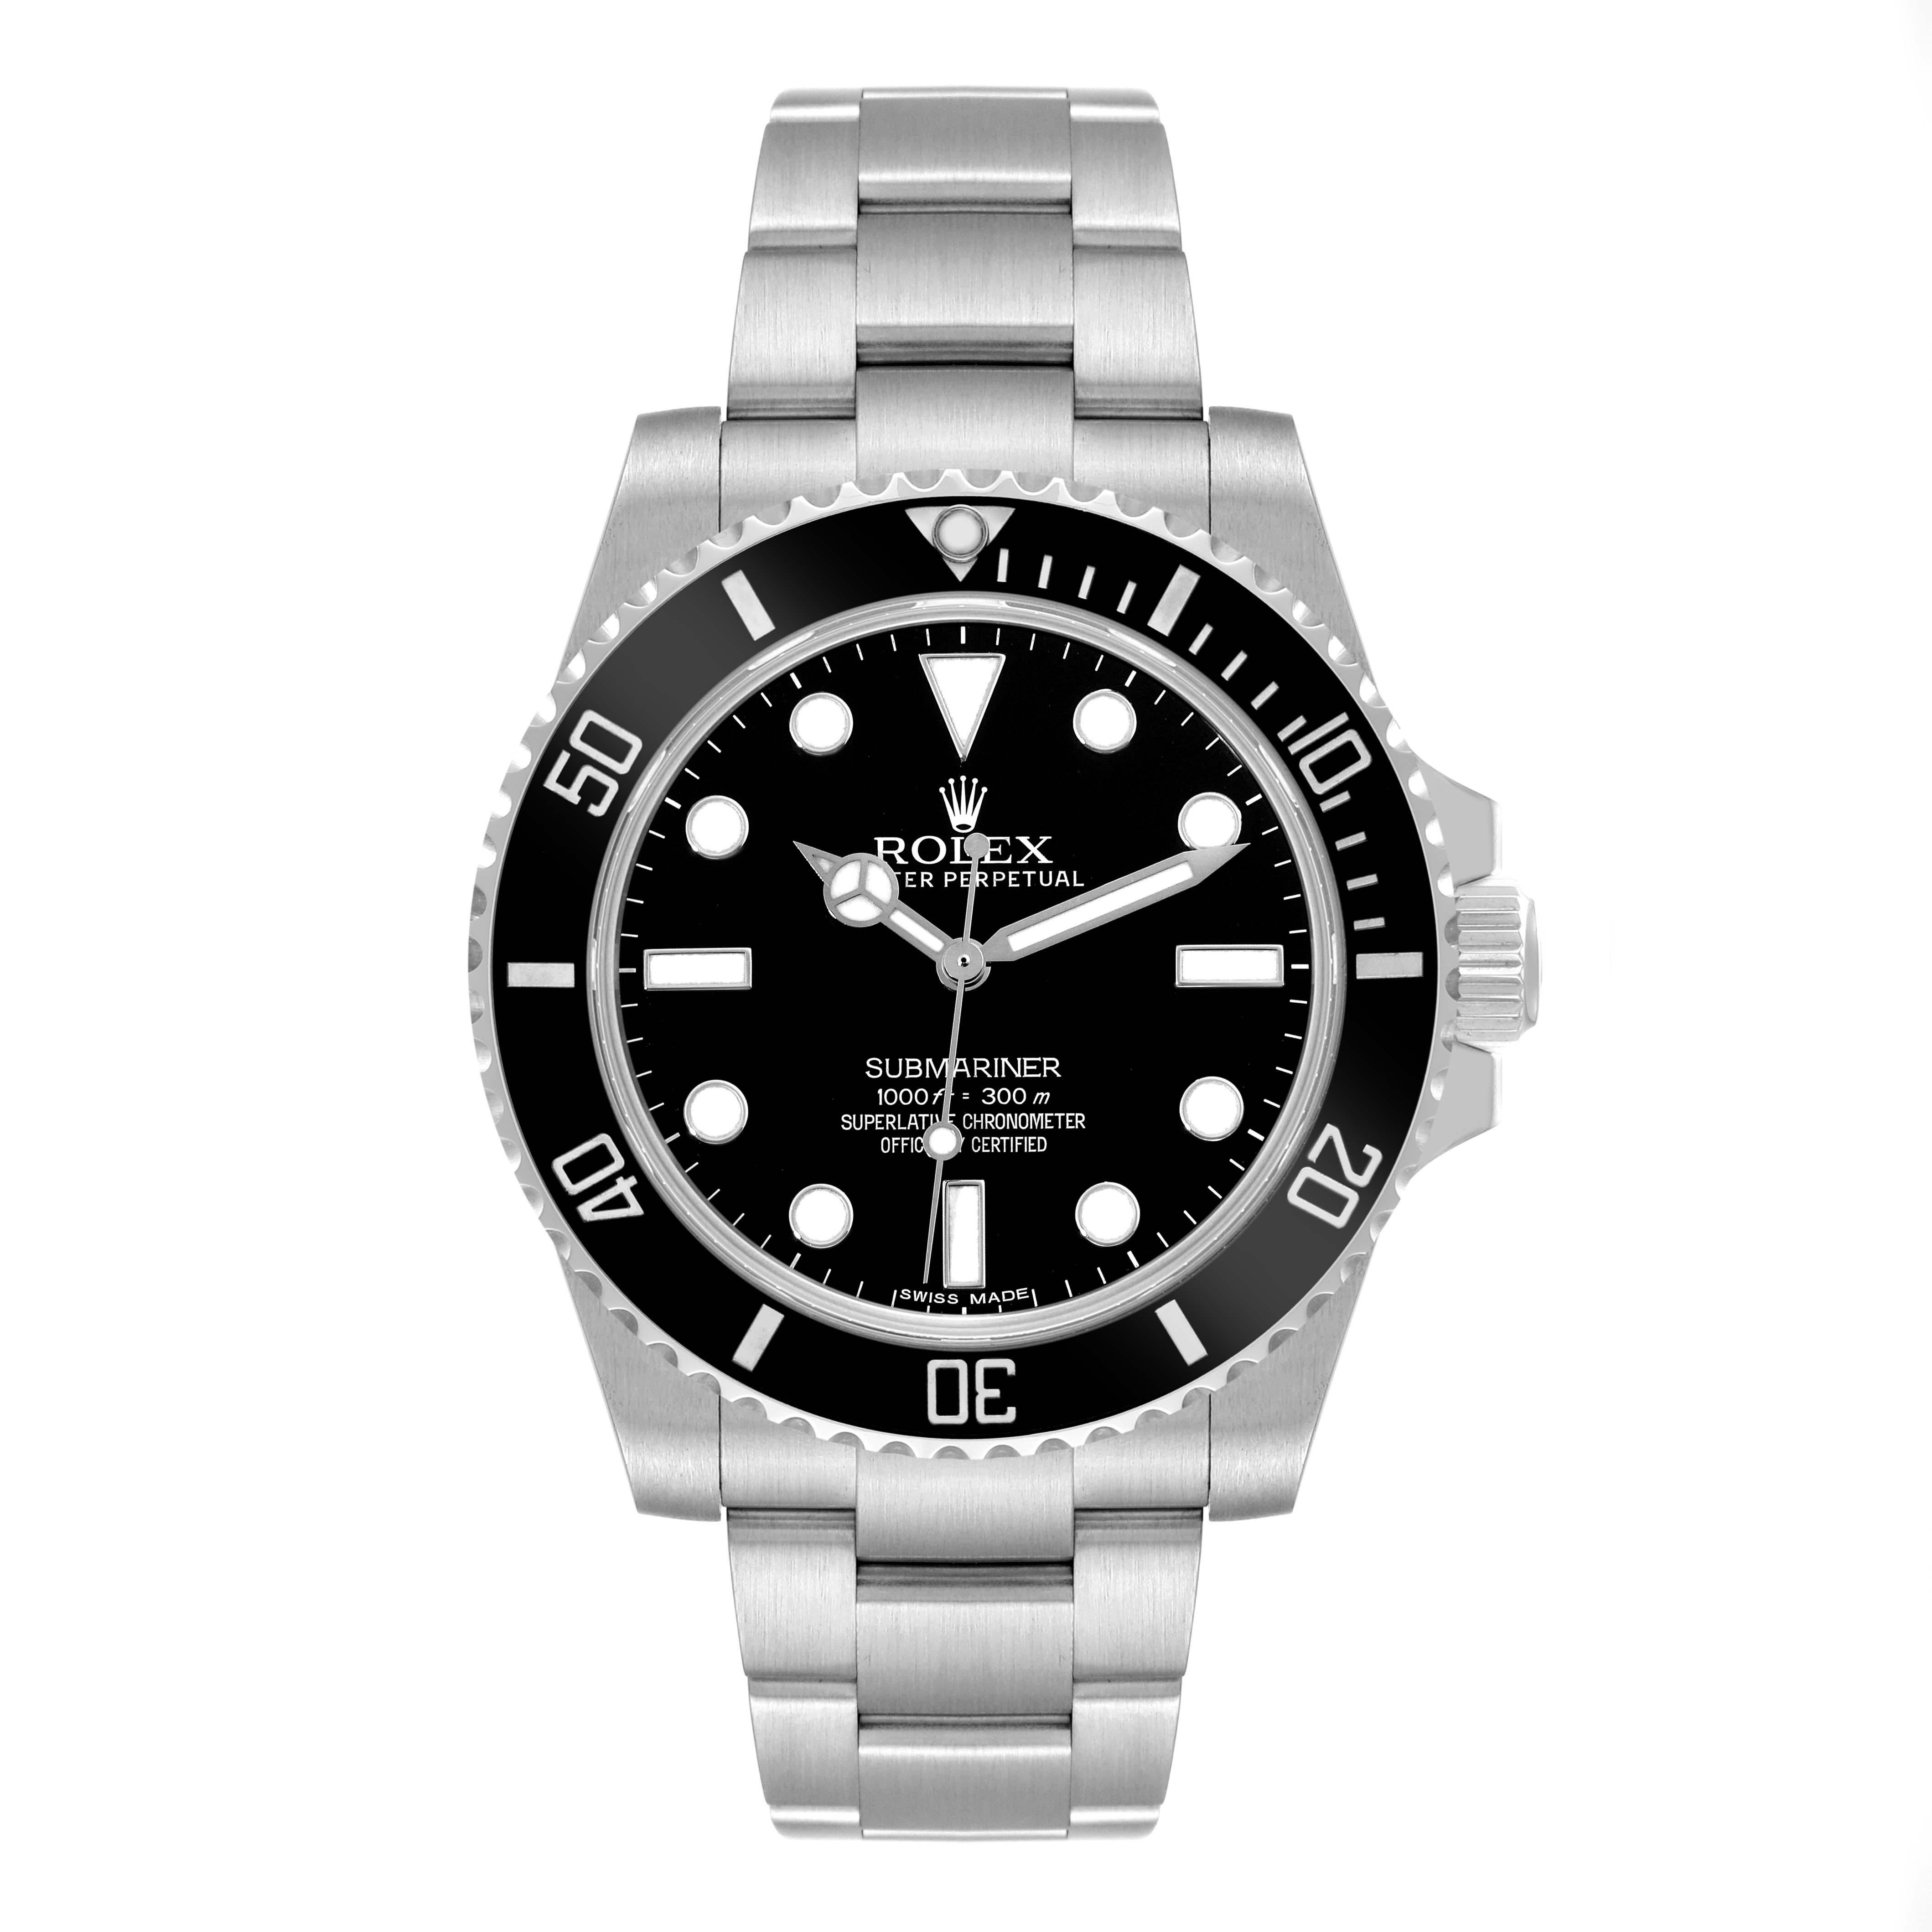 Rolex Submariner Black Dial Ceramic Bezel Steel Mens Watch 114060 Box Card. Officially certified chronometer automatic self-winding movement. Stainless steel case 40.0 mm in diameter. Rolex logo on the crown. Stainless steel uni-directional rotating